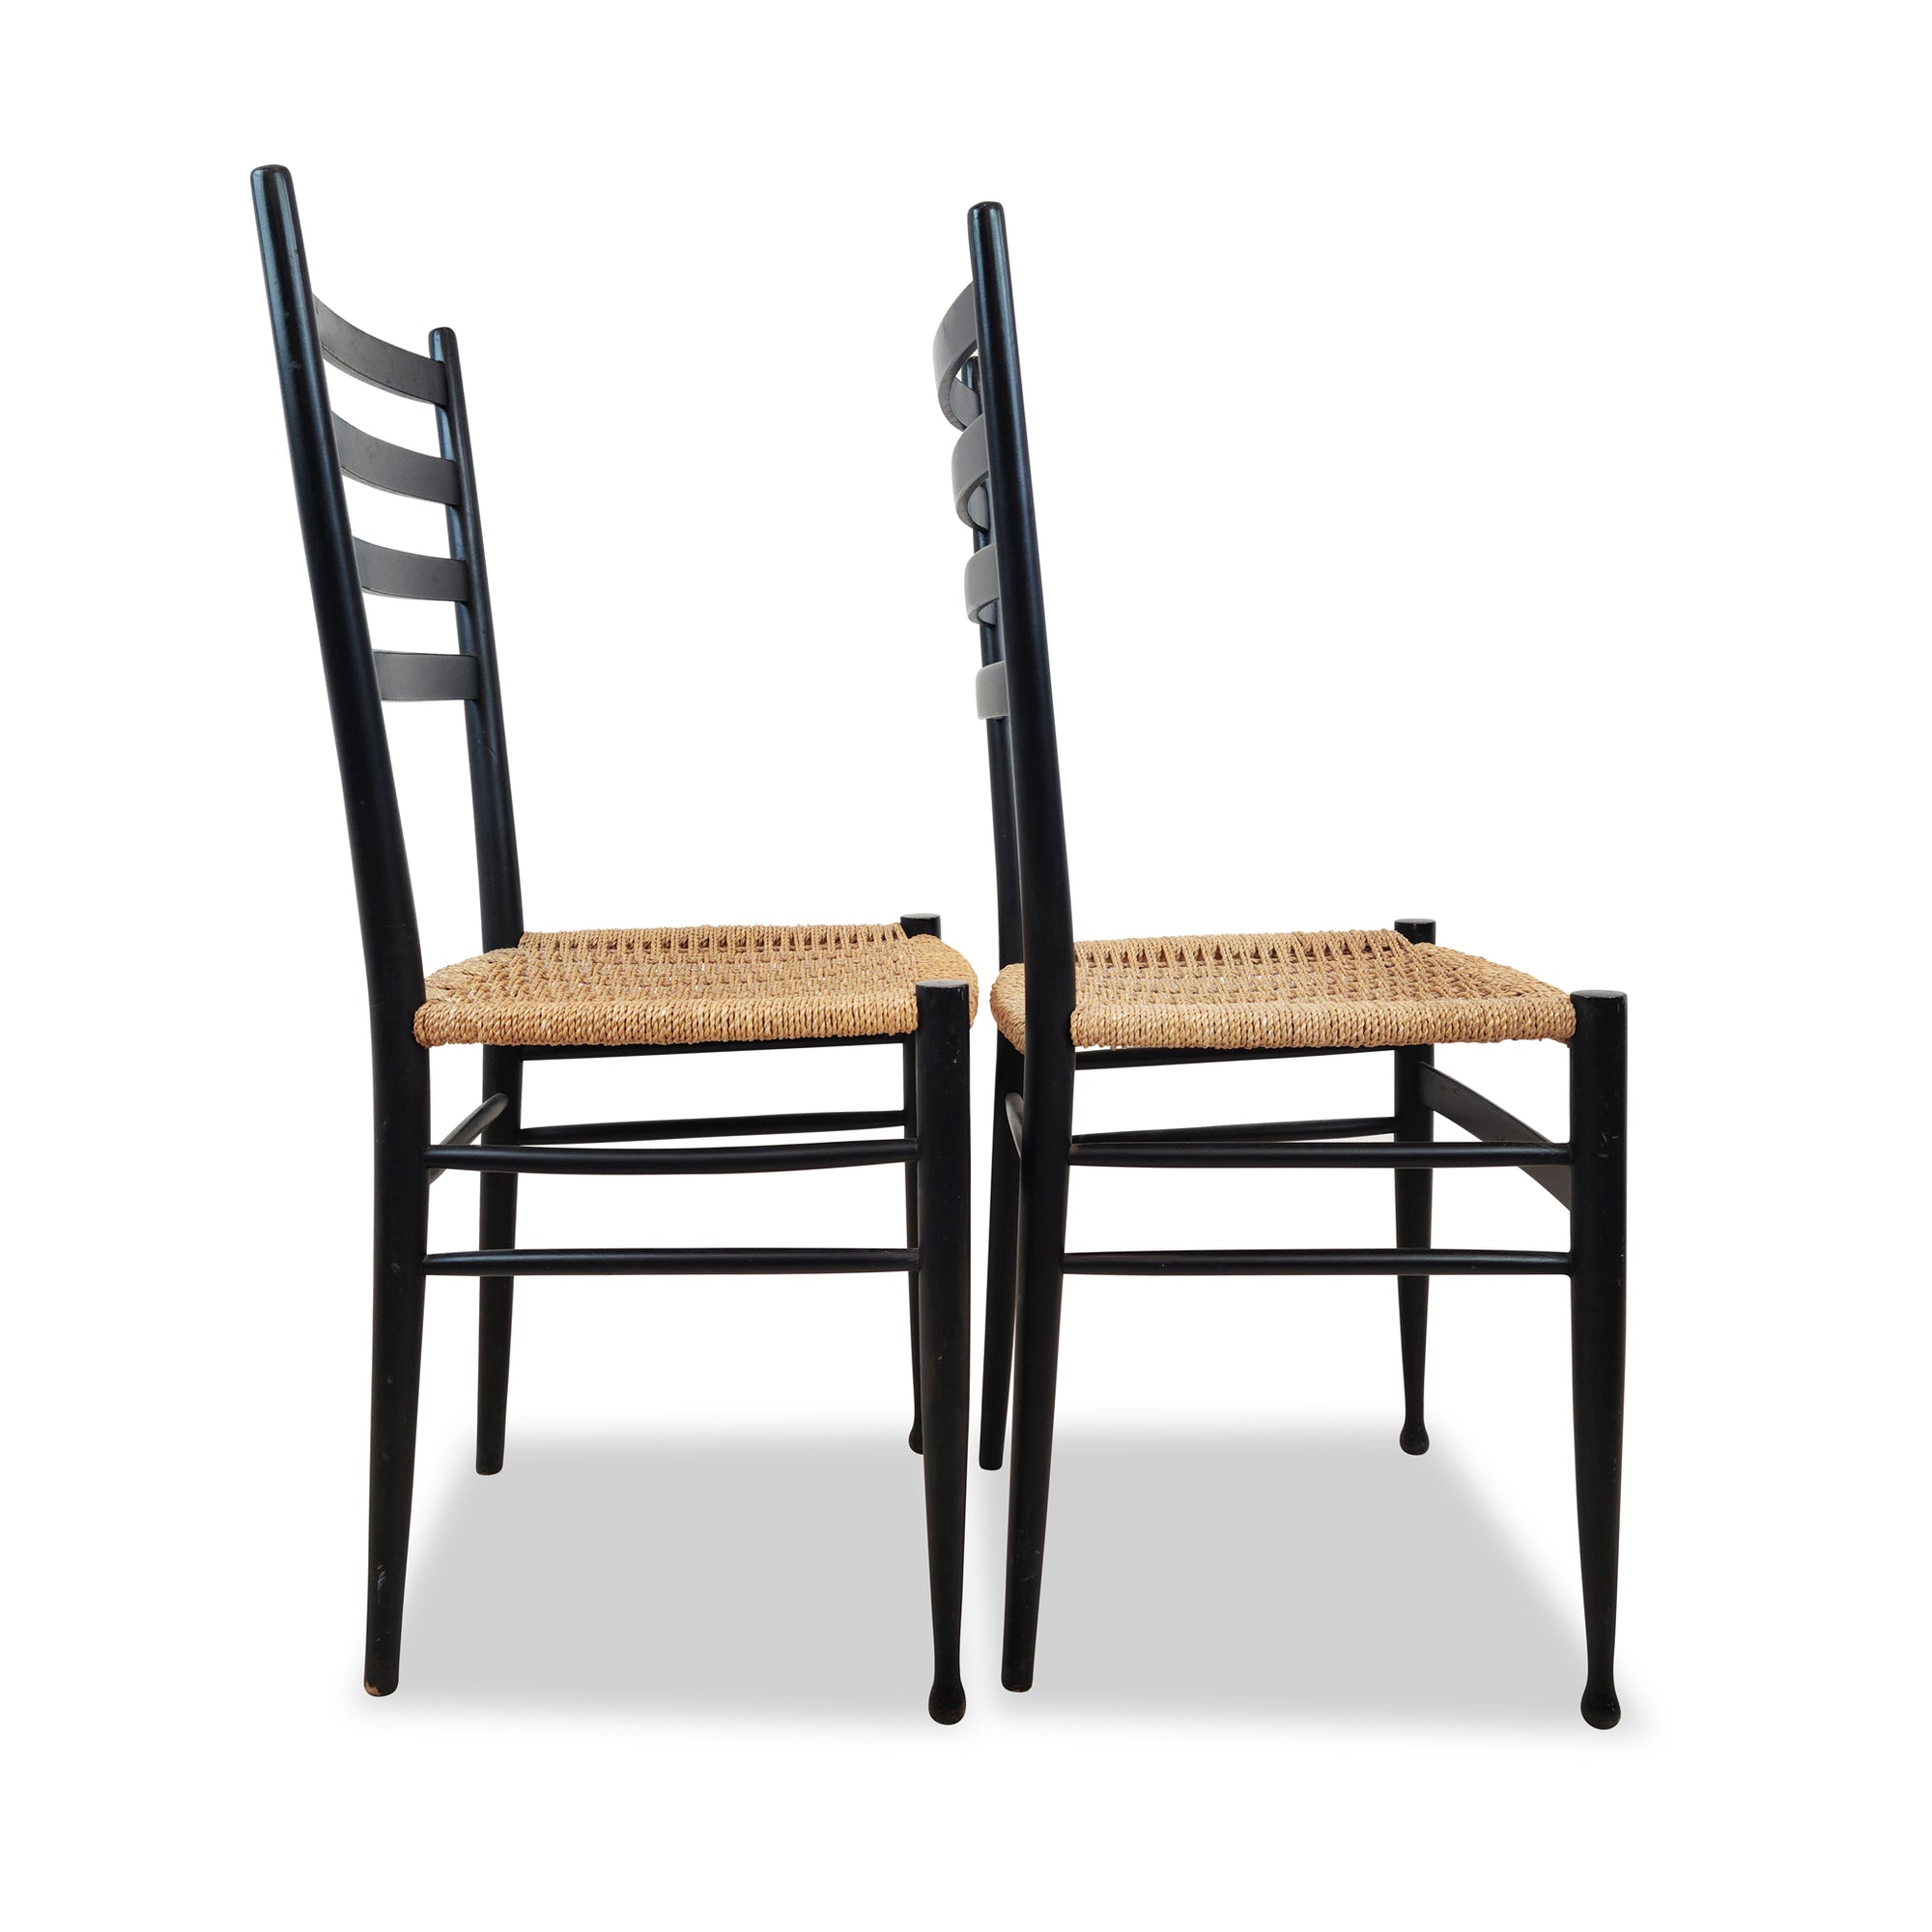 Black Lacquered Gio Ponti Style Dining ChairsBlack Lacquered Gio Ponti Style Dining Chairs